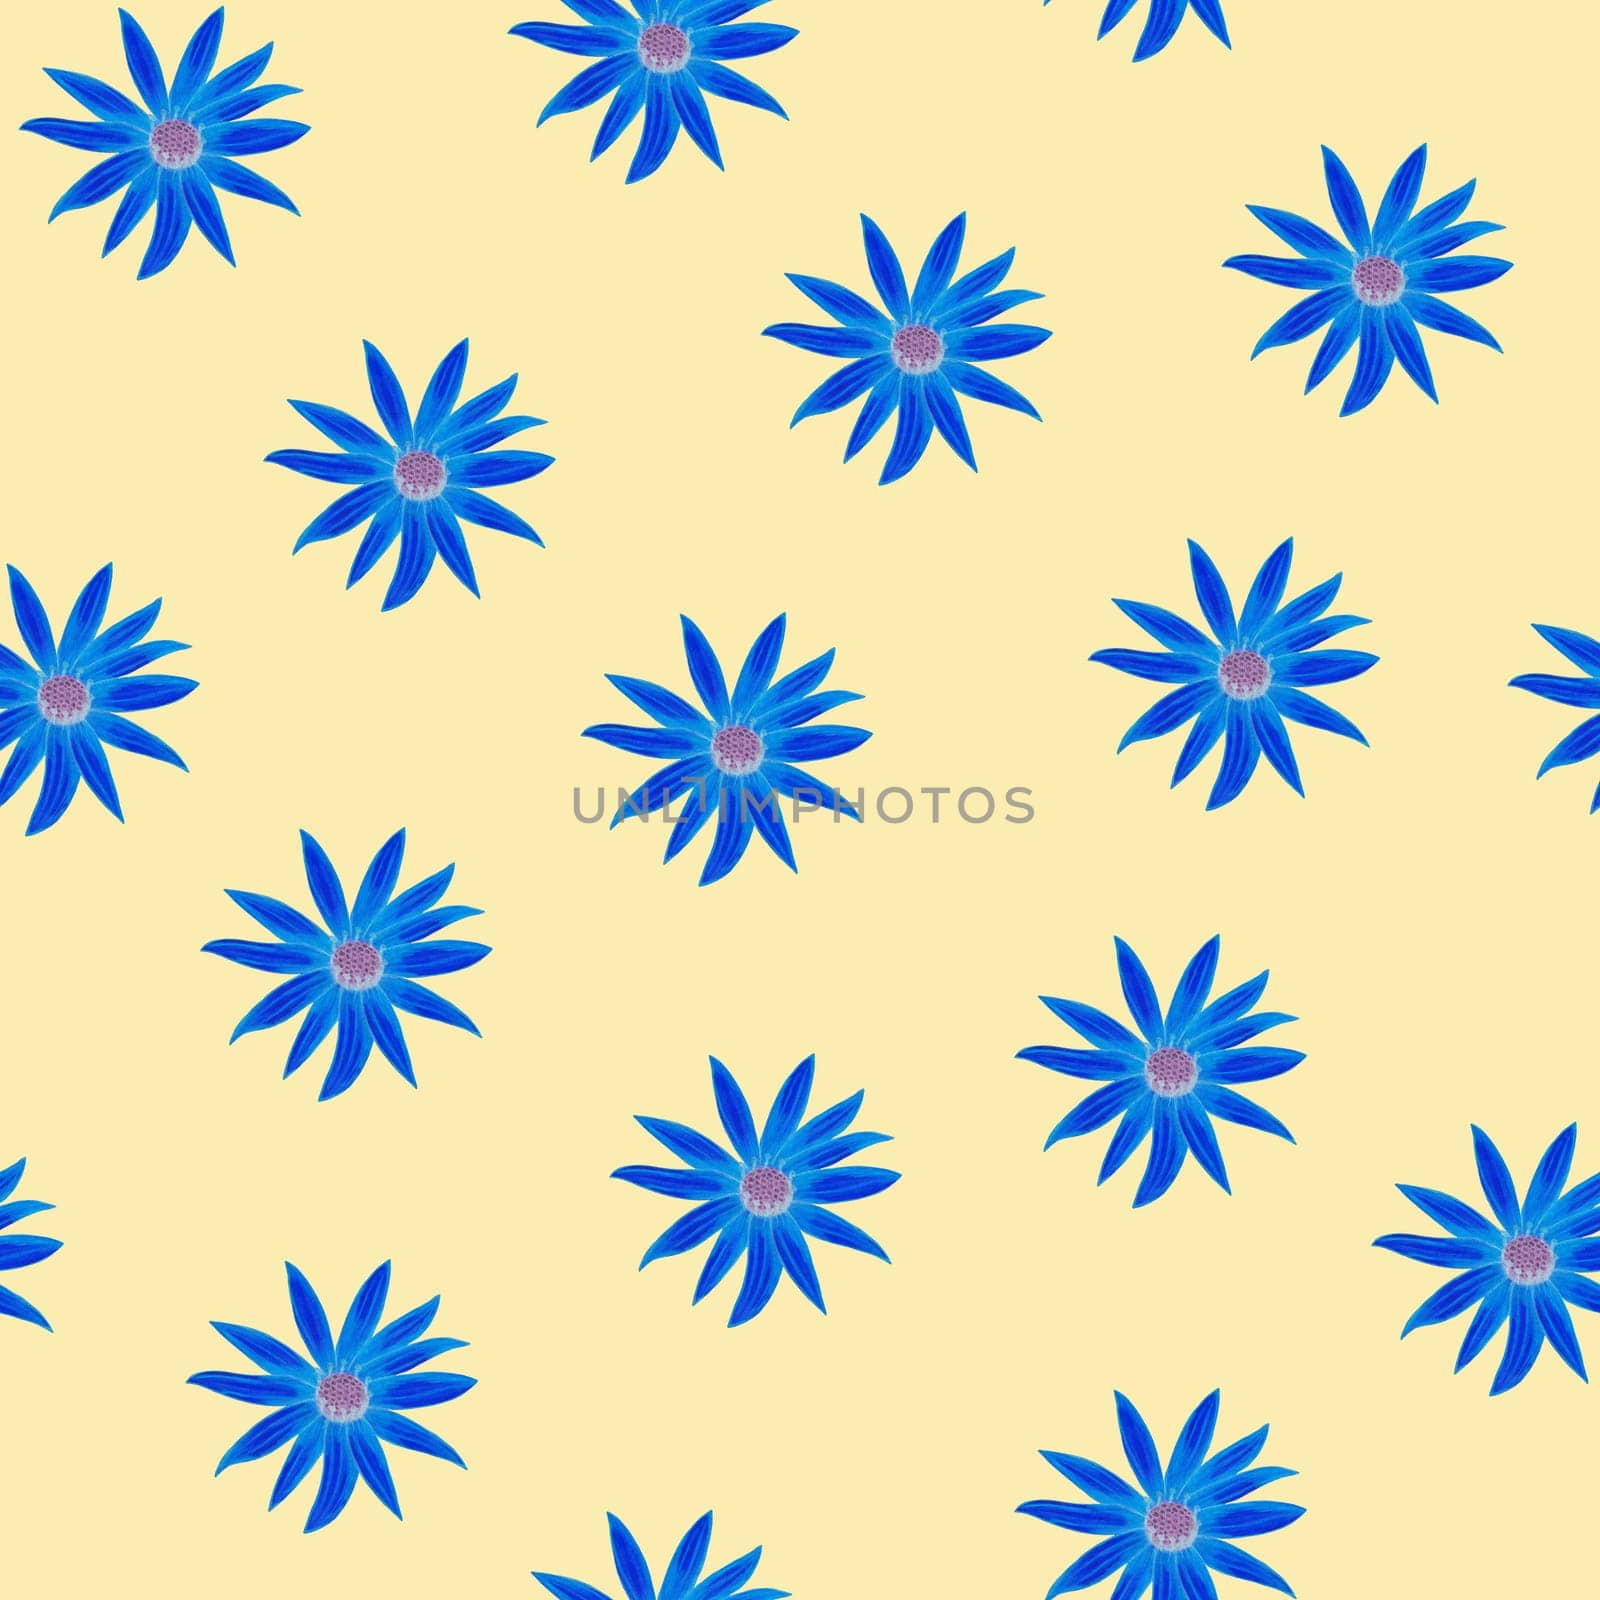 Daisy Blue Flower Seamless Pattern. Hand Drawn Floral Digital Paper on Light Yellow Background.